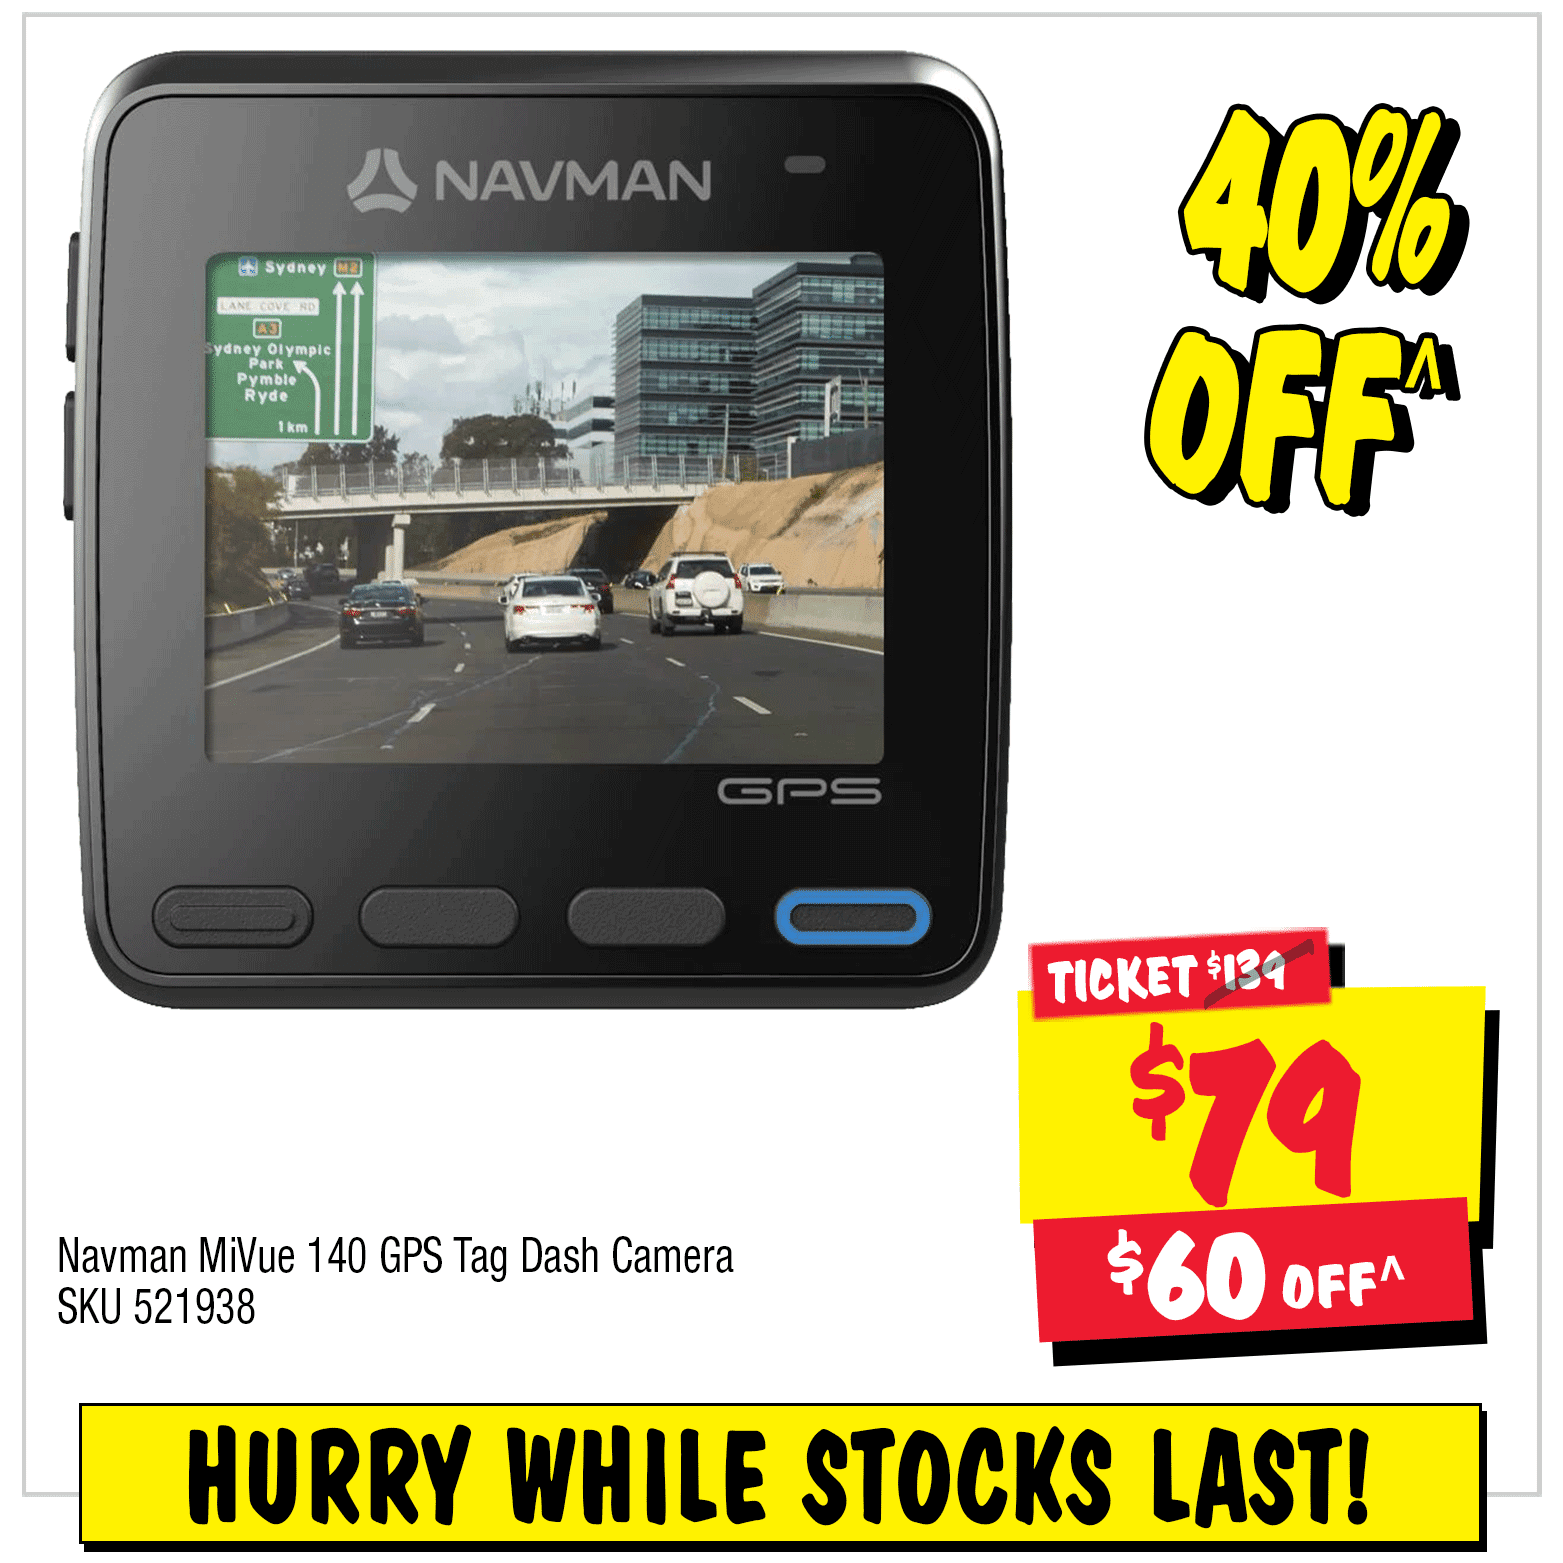 40% OFF Navman MiVue 140 GPS Tag Dash Camera - now $79 + delivery (save $60) with coupon code